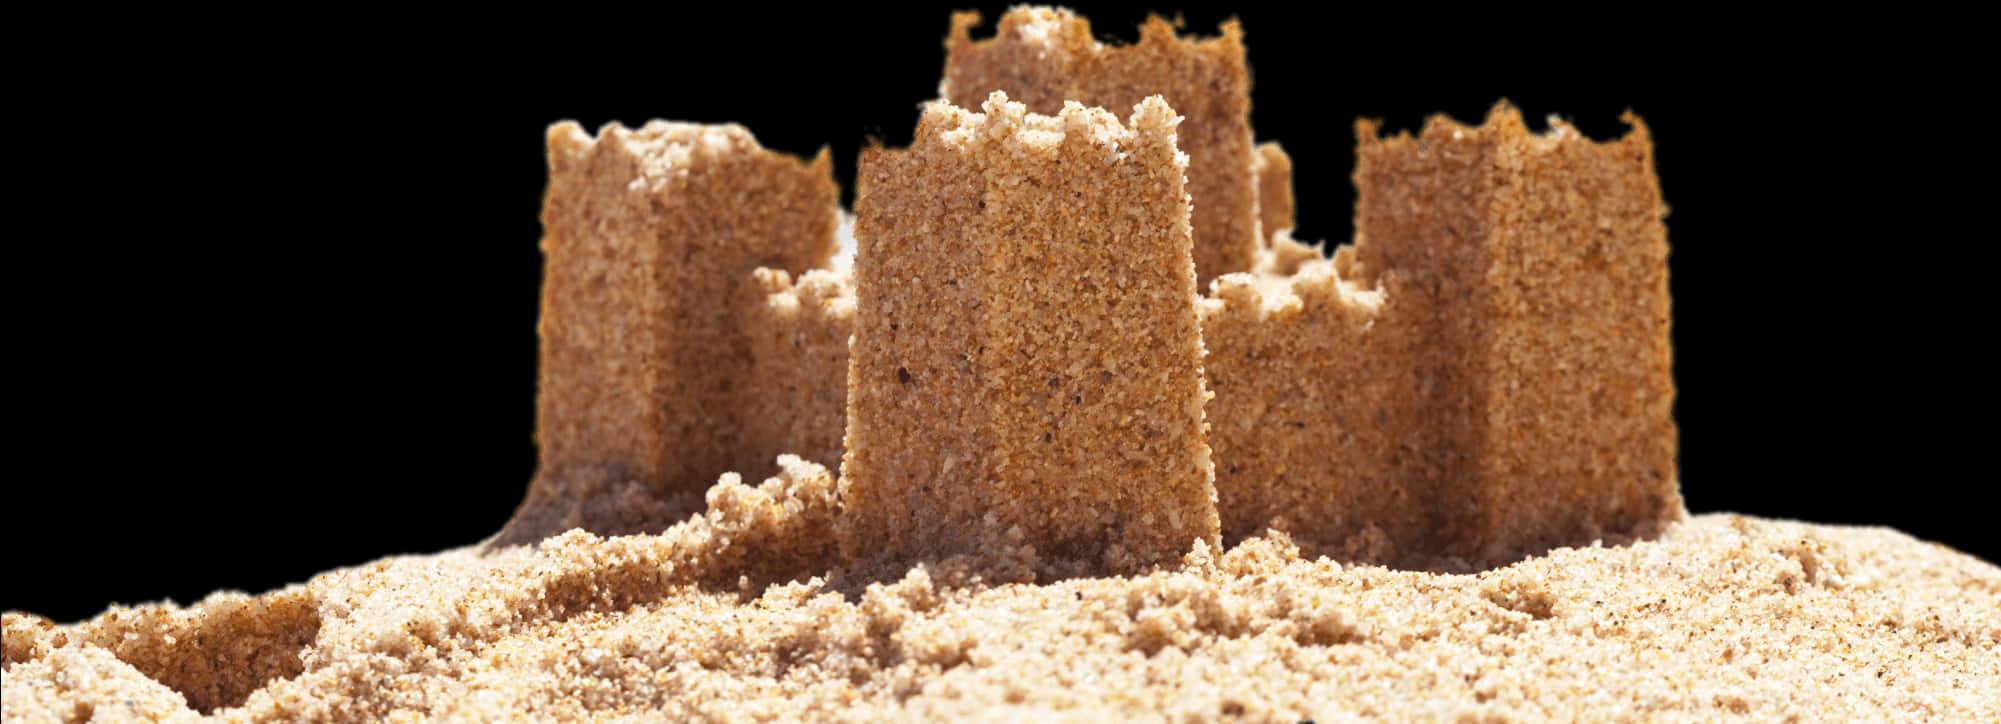 A Sand Castle Made Out Of Sand